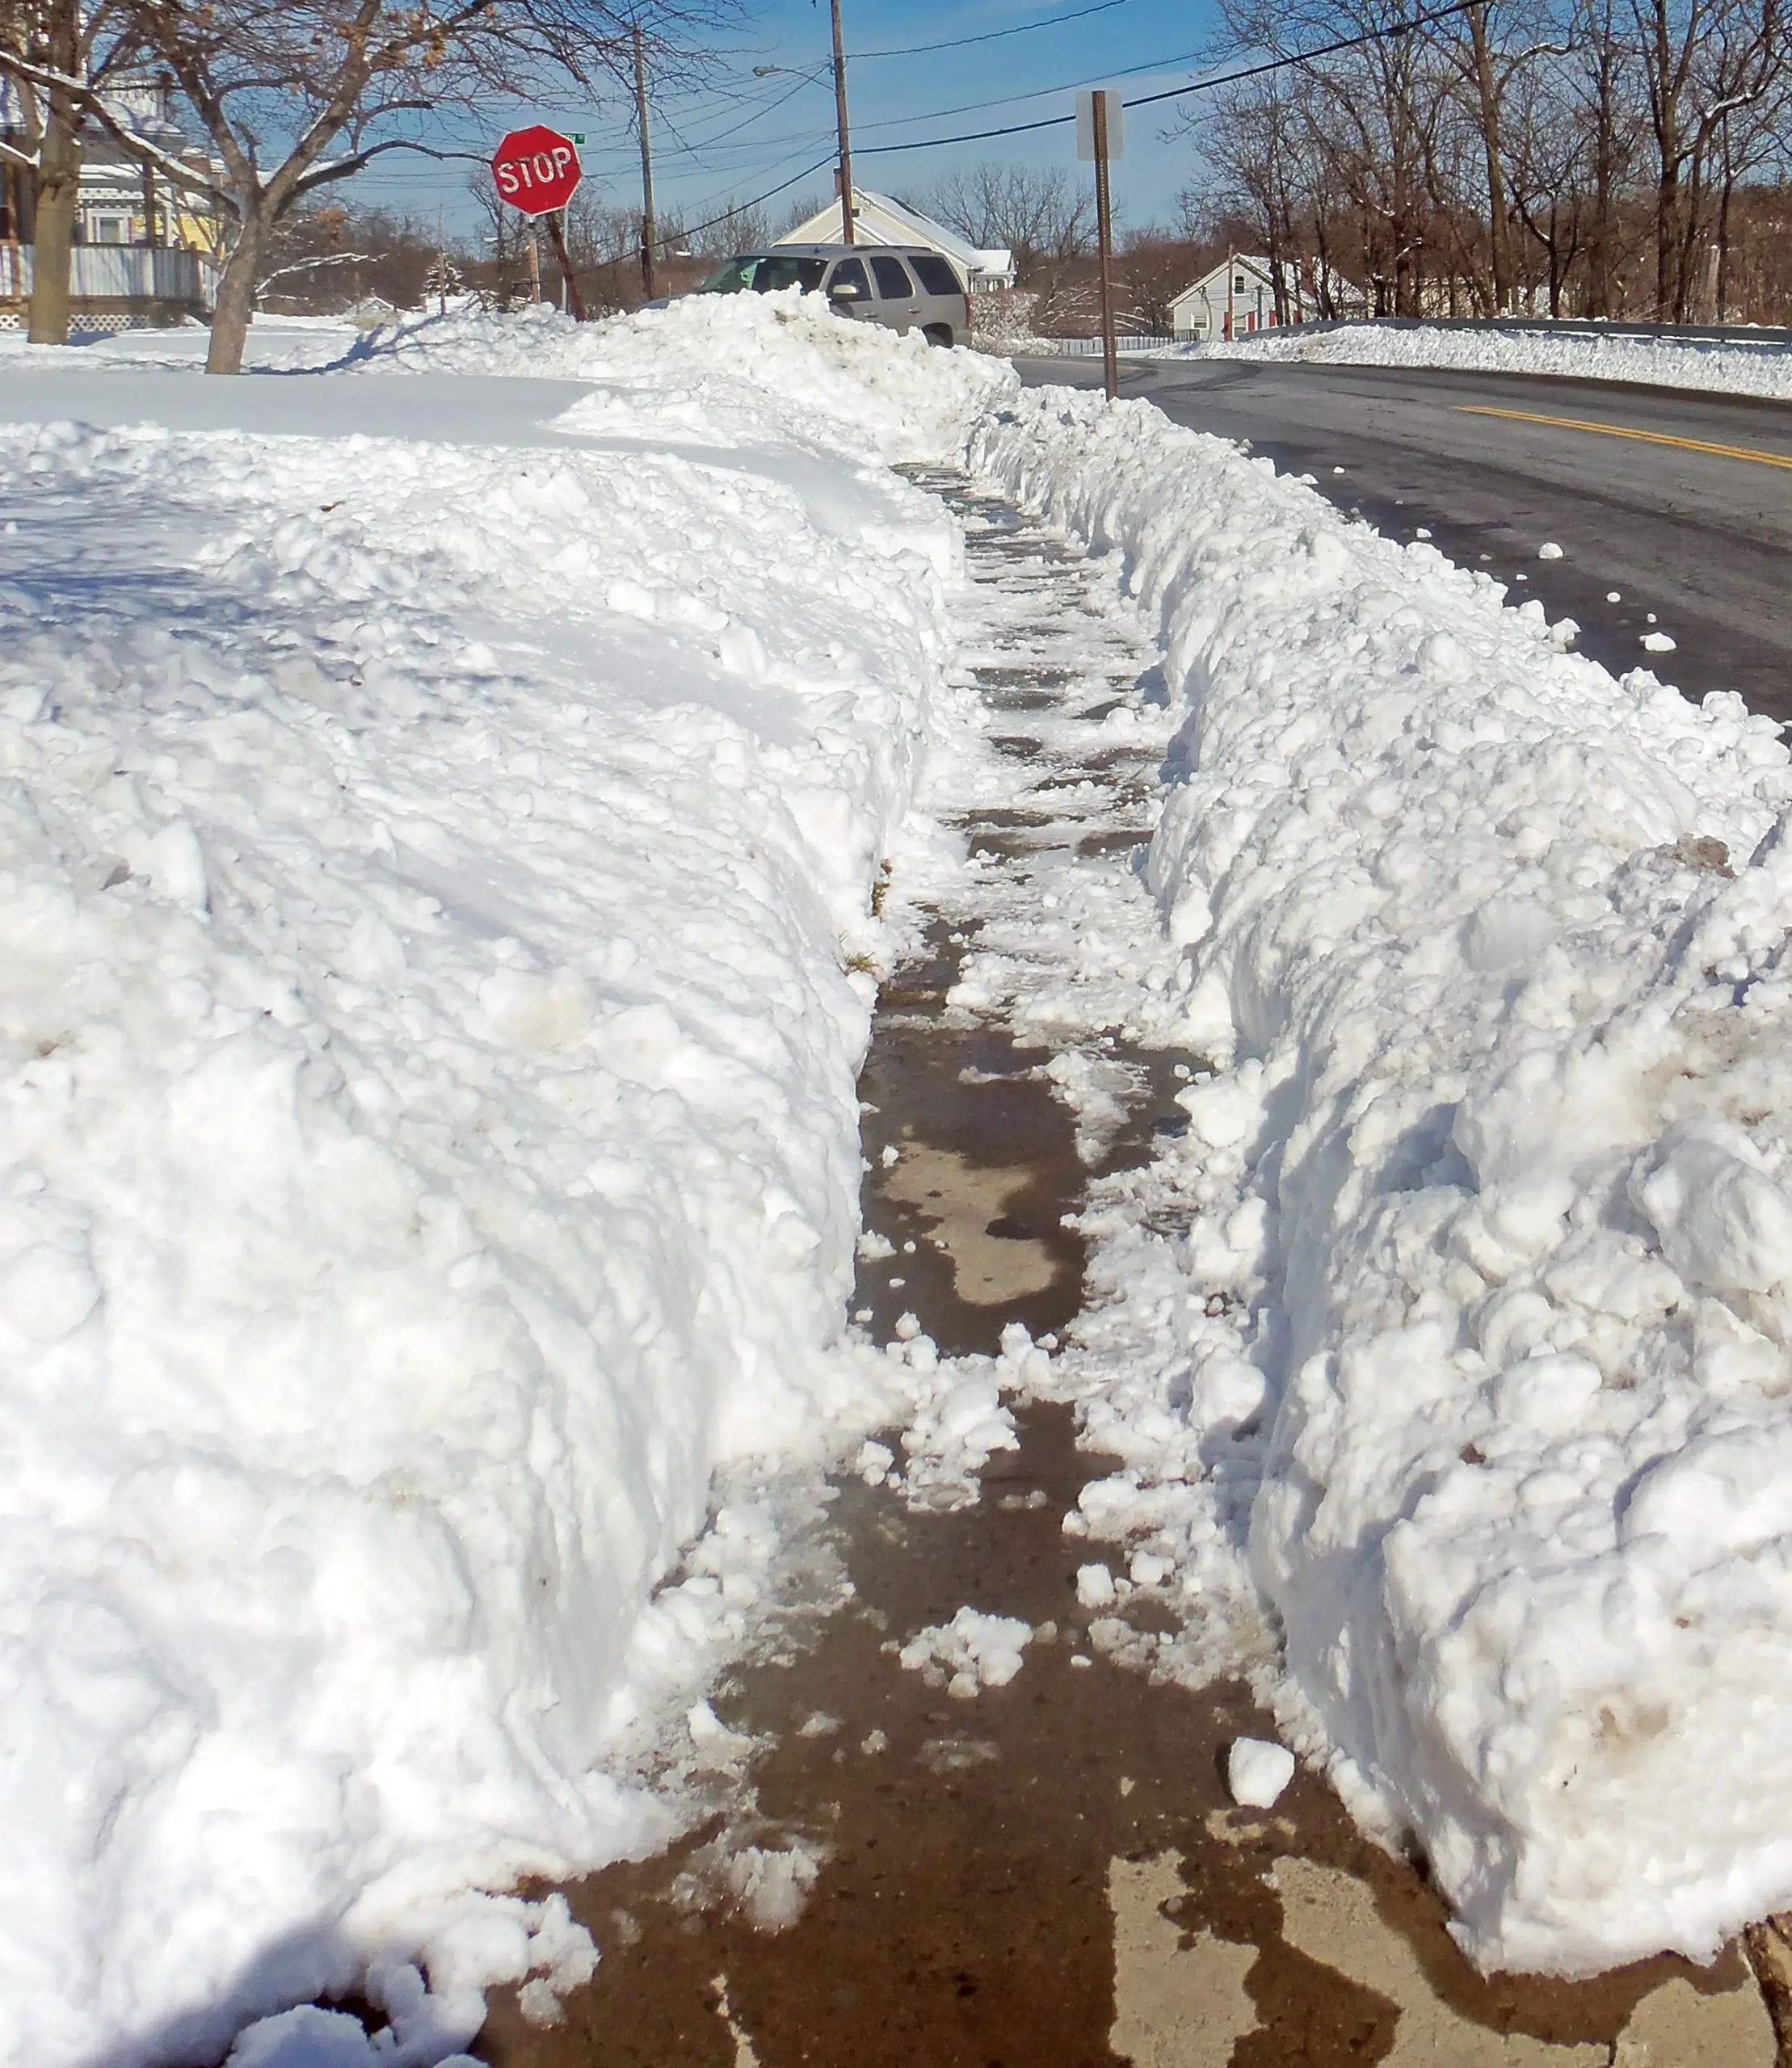 A Kamloops councillor wants to give a certain aspect of snow removal another look